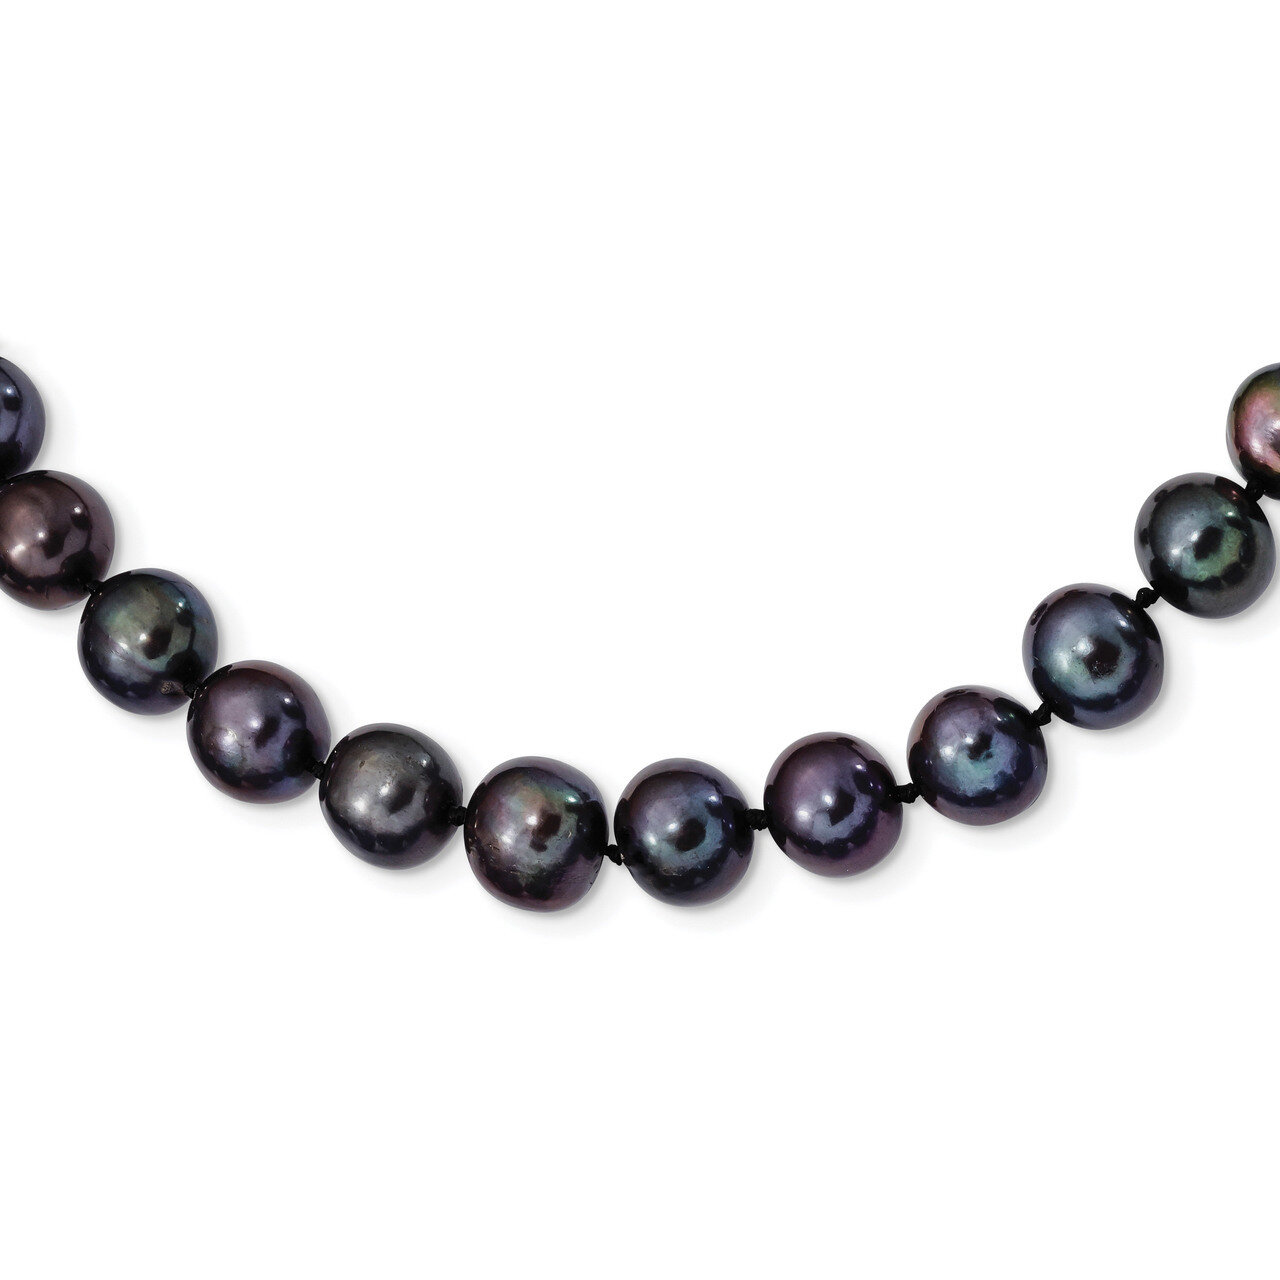 9-10mm Black Cultured Freshwater Pearl Necklace 24 Inch Sterling Silver Rhodium-plated QH5157-24